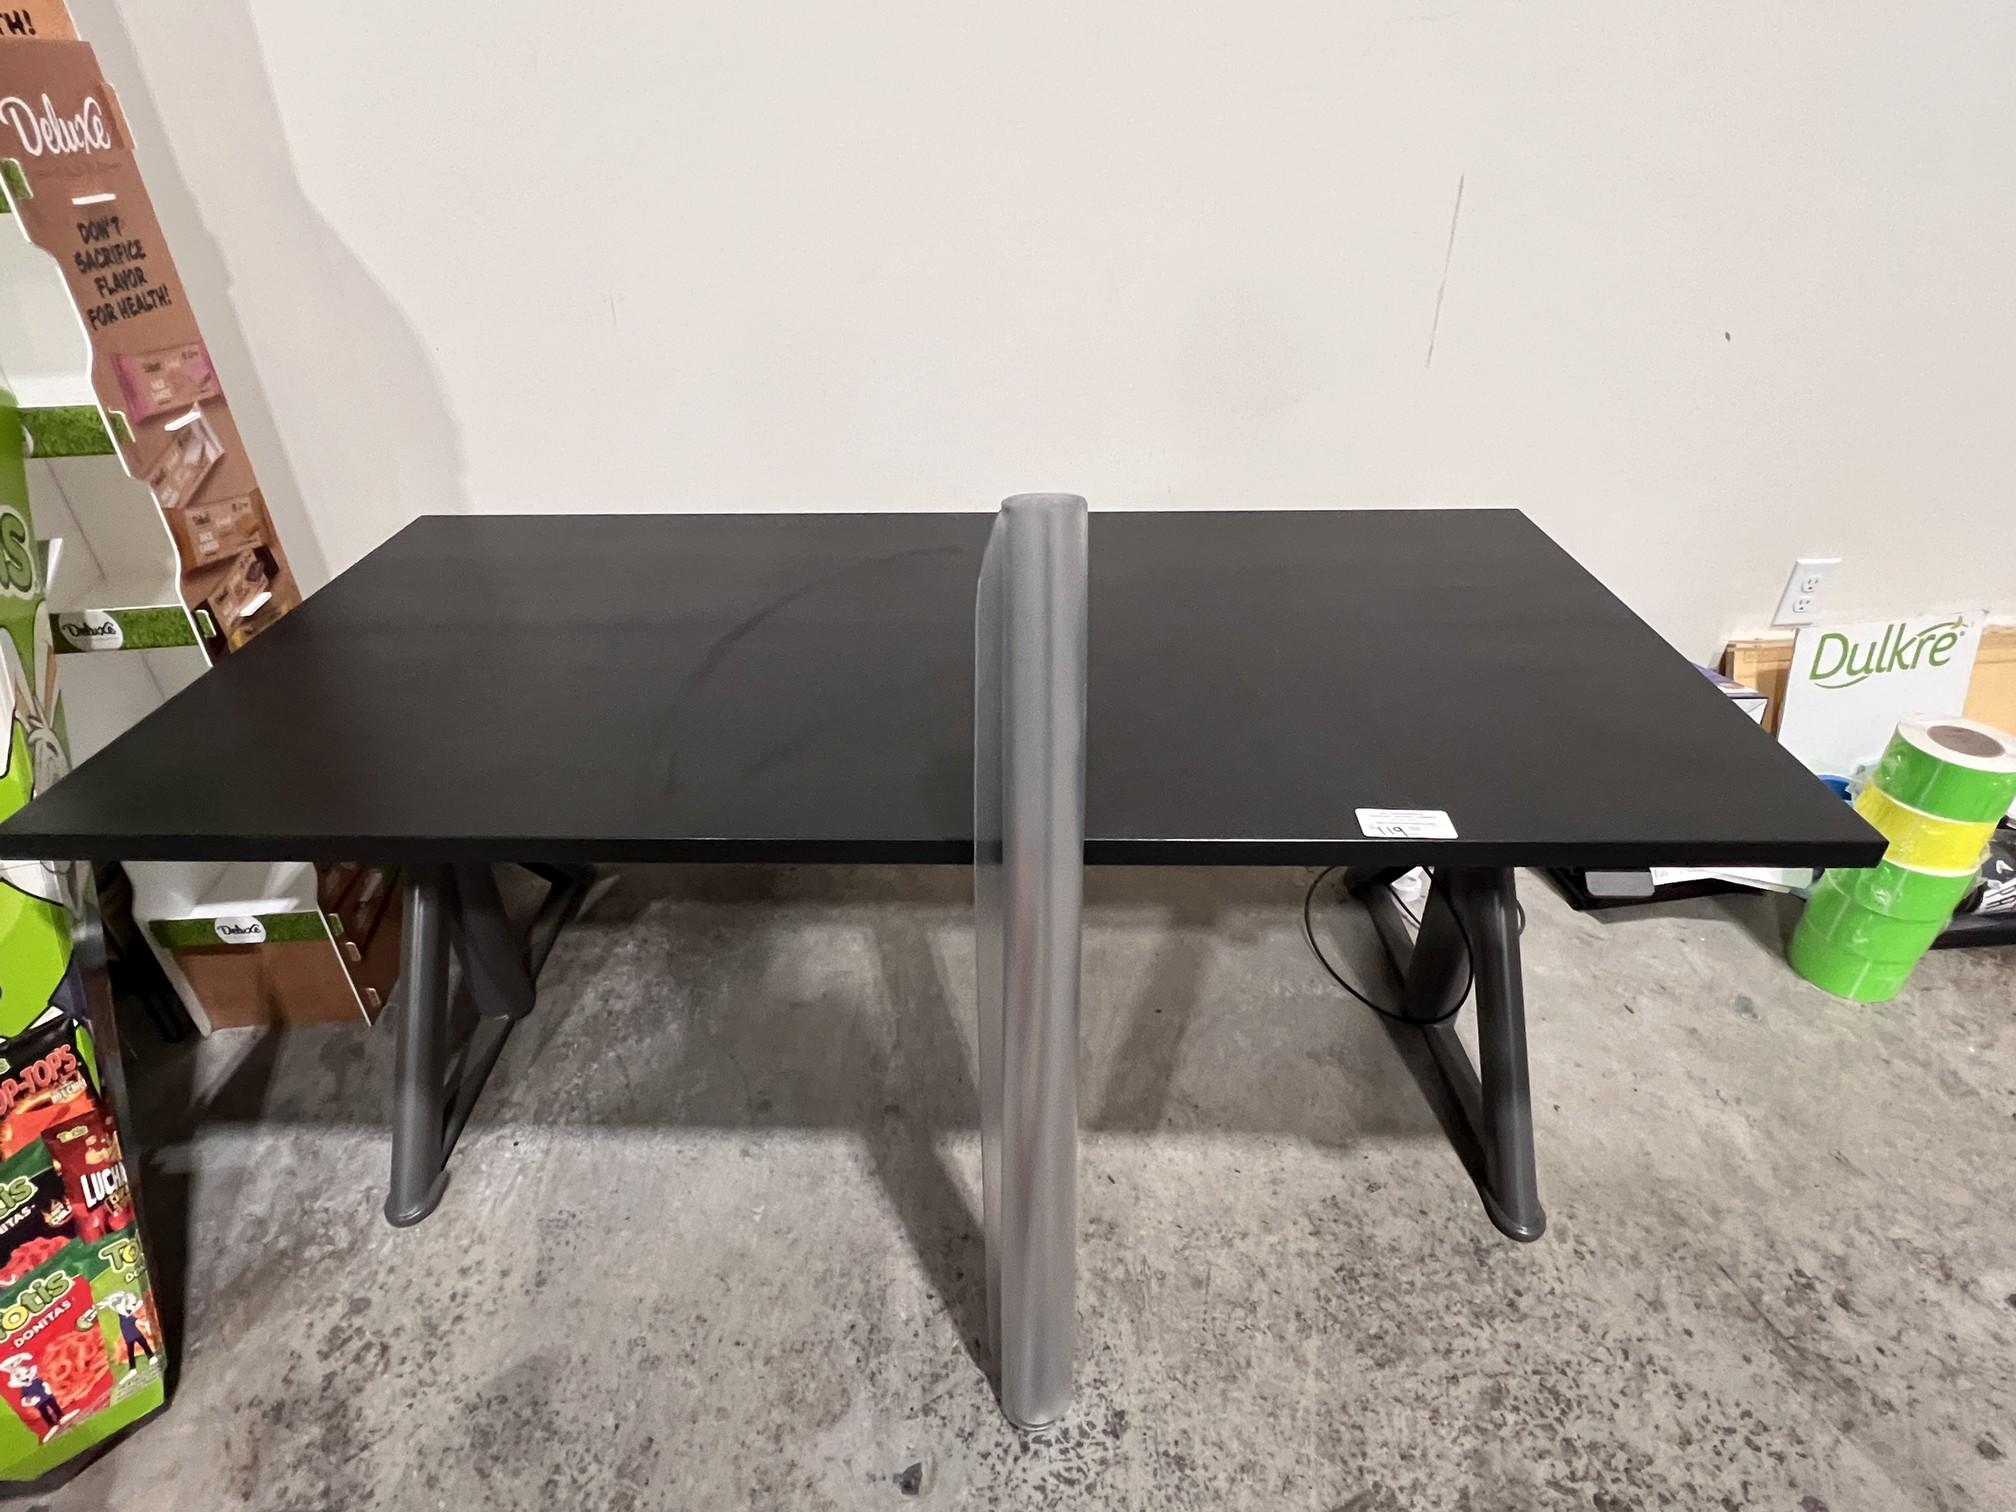 Electric Table, 32" X 64" (Auto Lift) from24" Low to 50" High